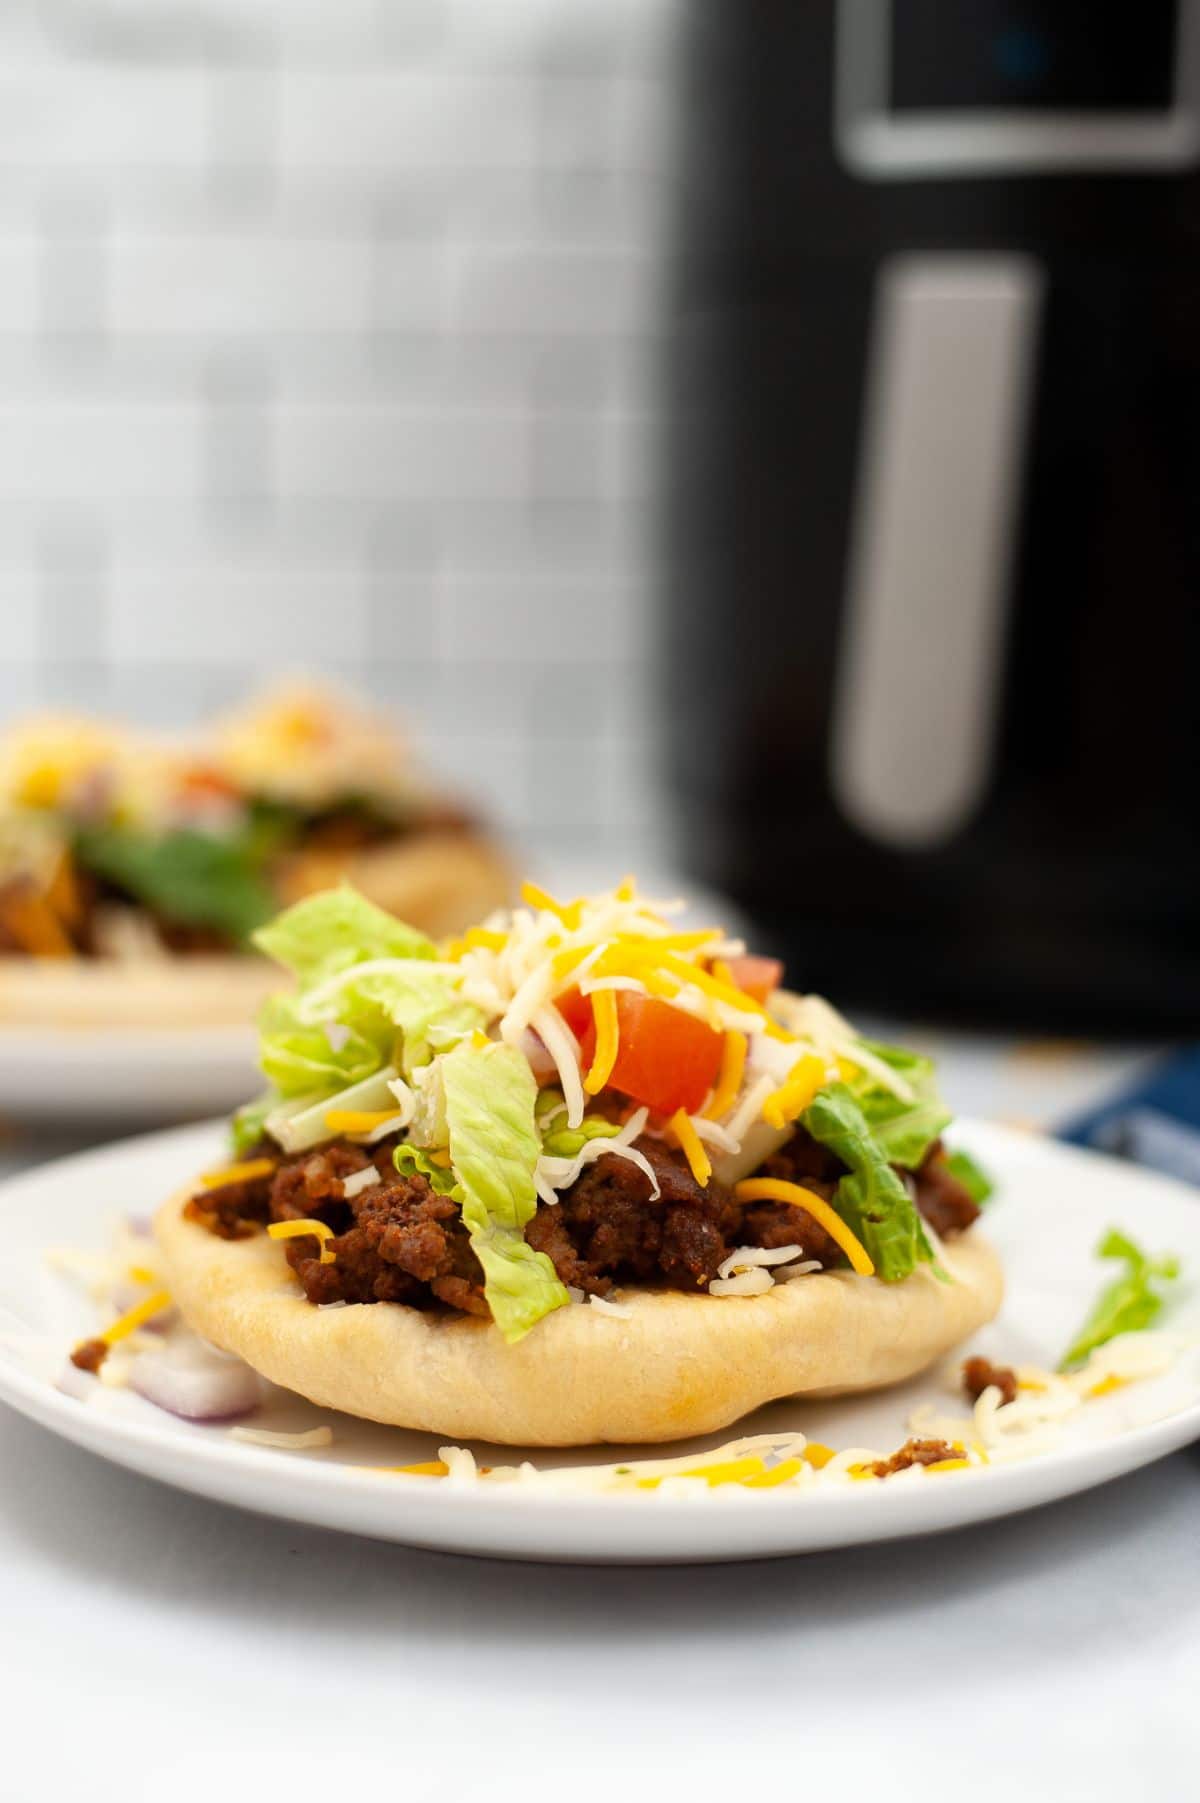 A view from the side of the Air Fryer Indian Bread Tacos, shot vertically with the air fryer and other taco bread blurred behind it.